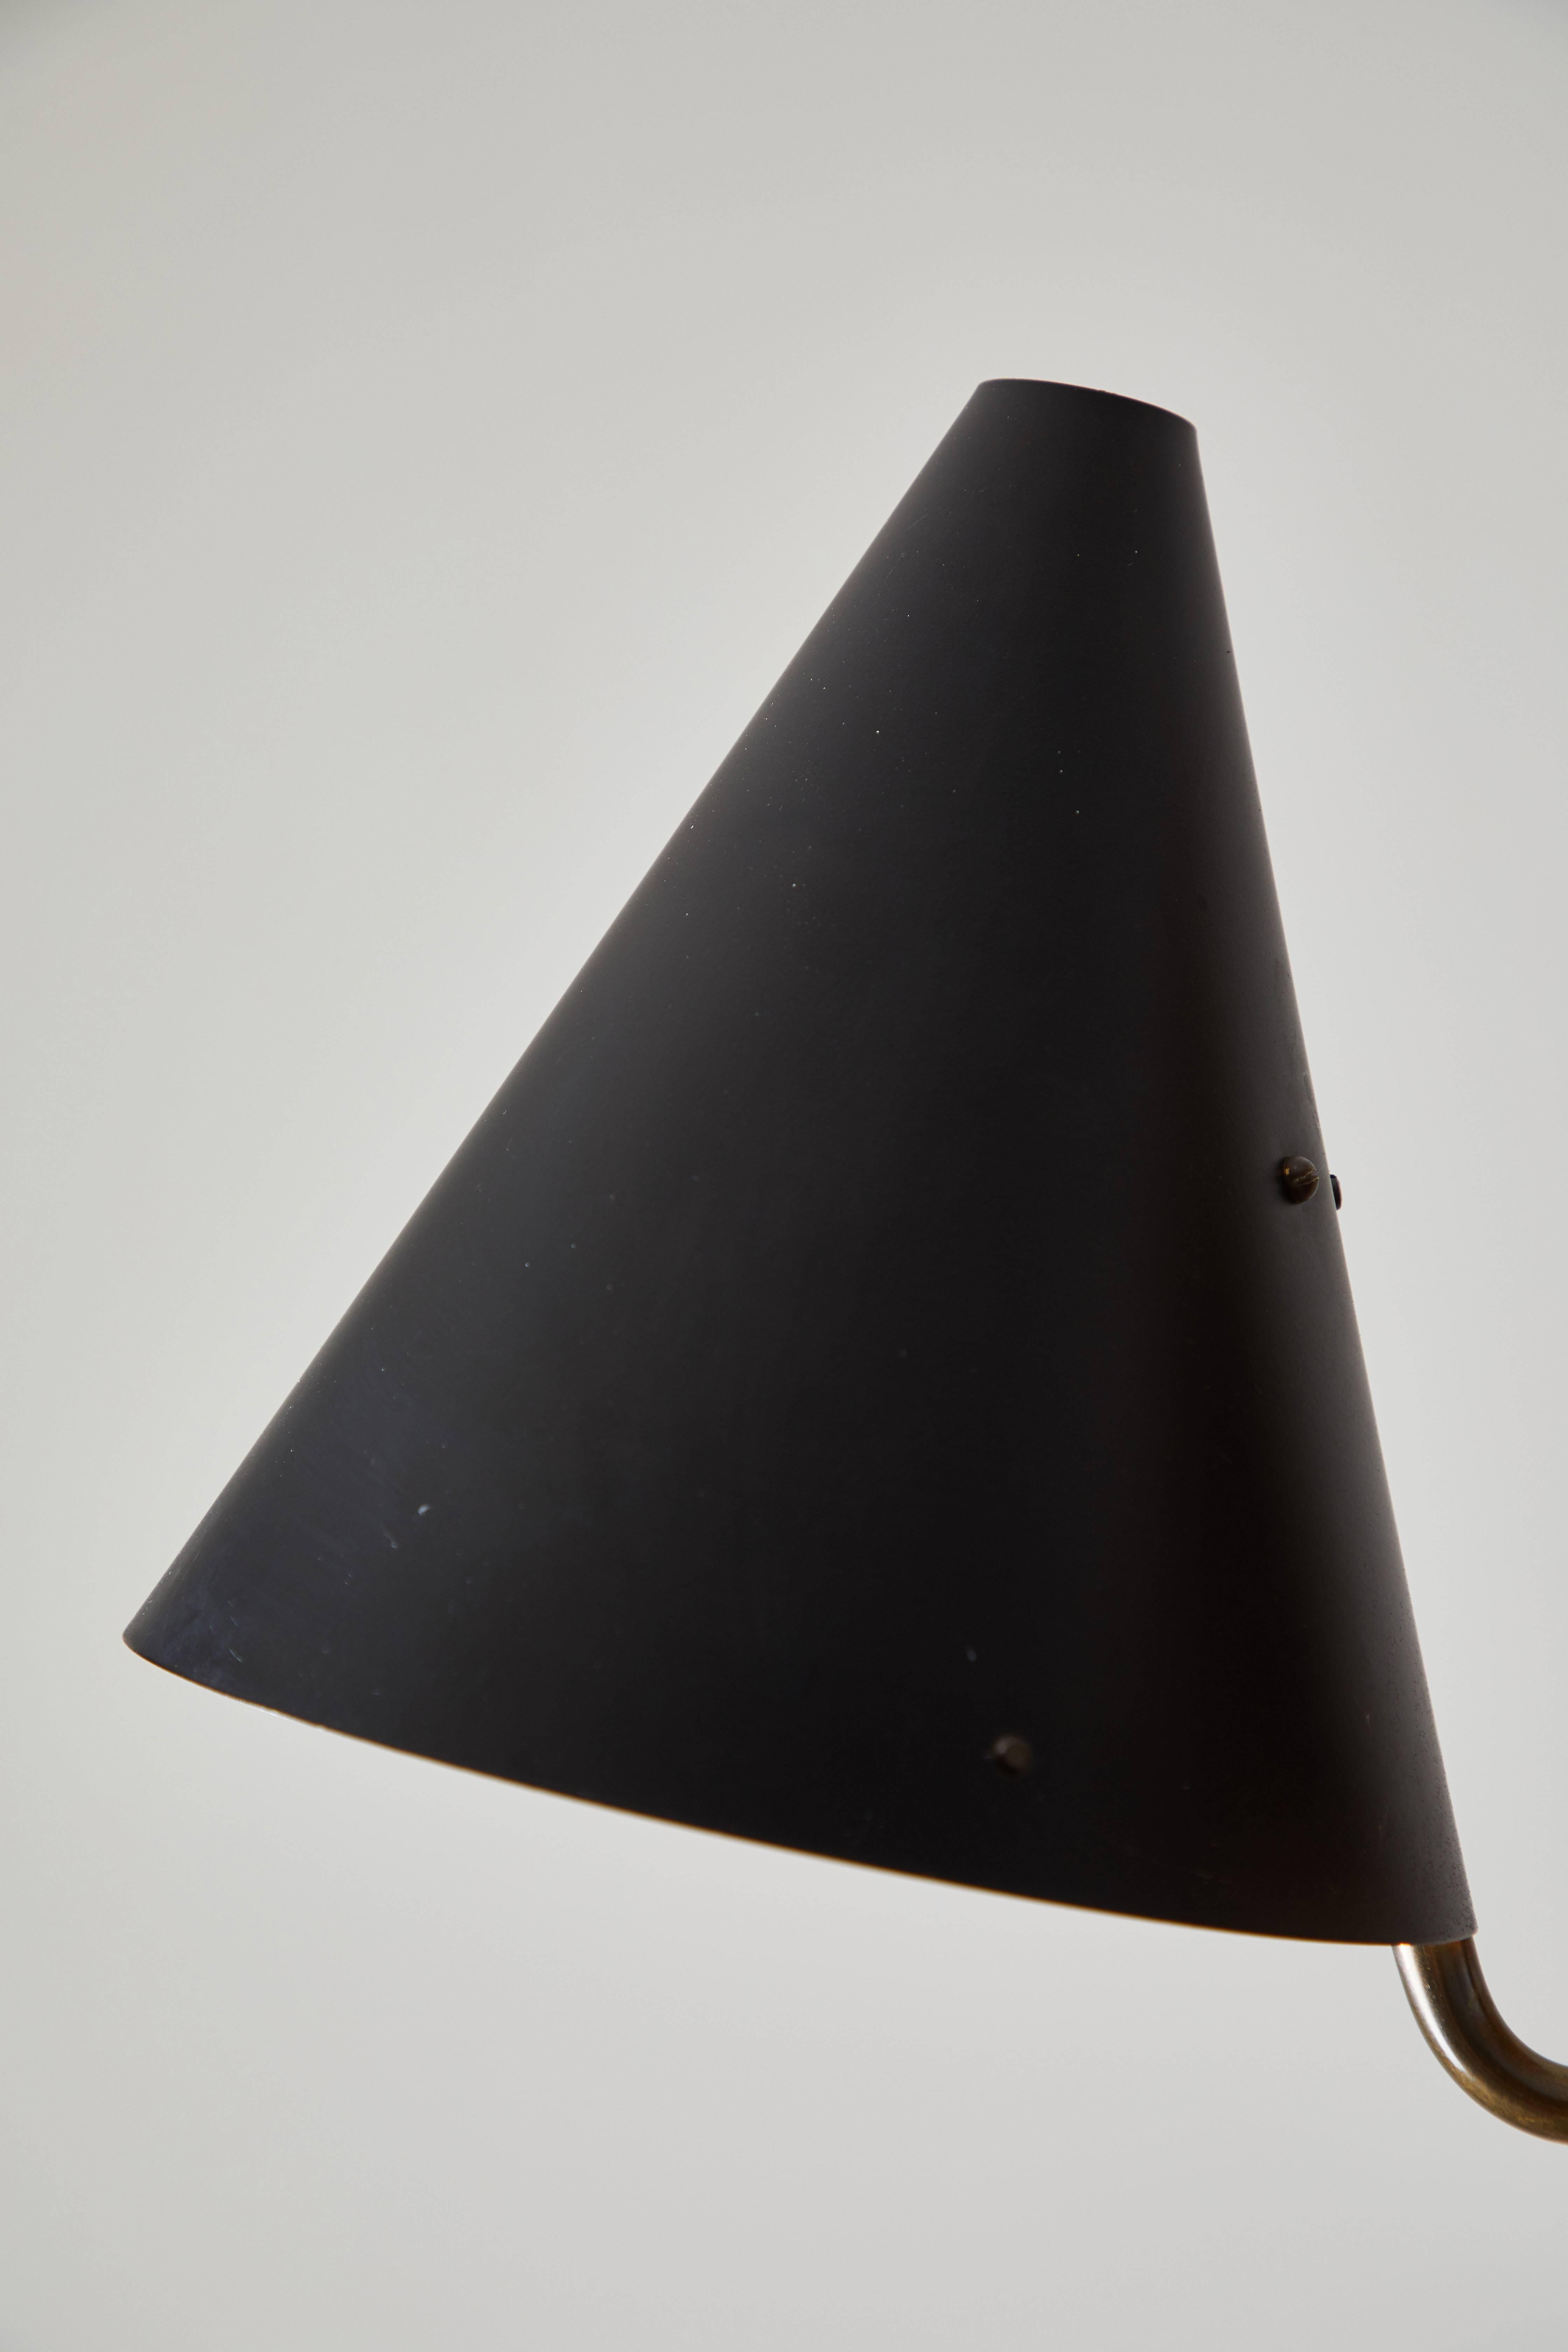 Mid-20th Century Rare Double Pendant Lamp by Svend Aage Holm Sørensen for Lyfa